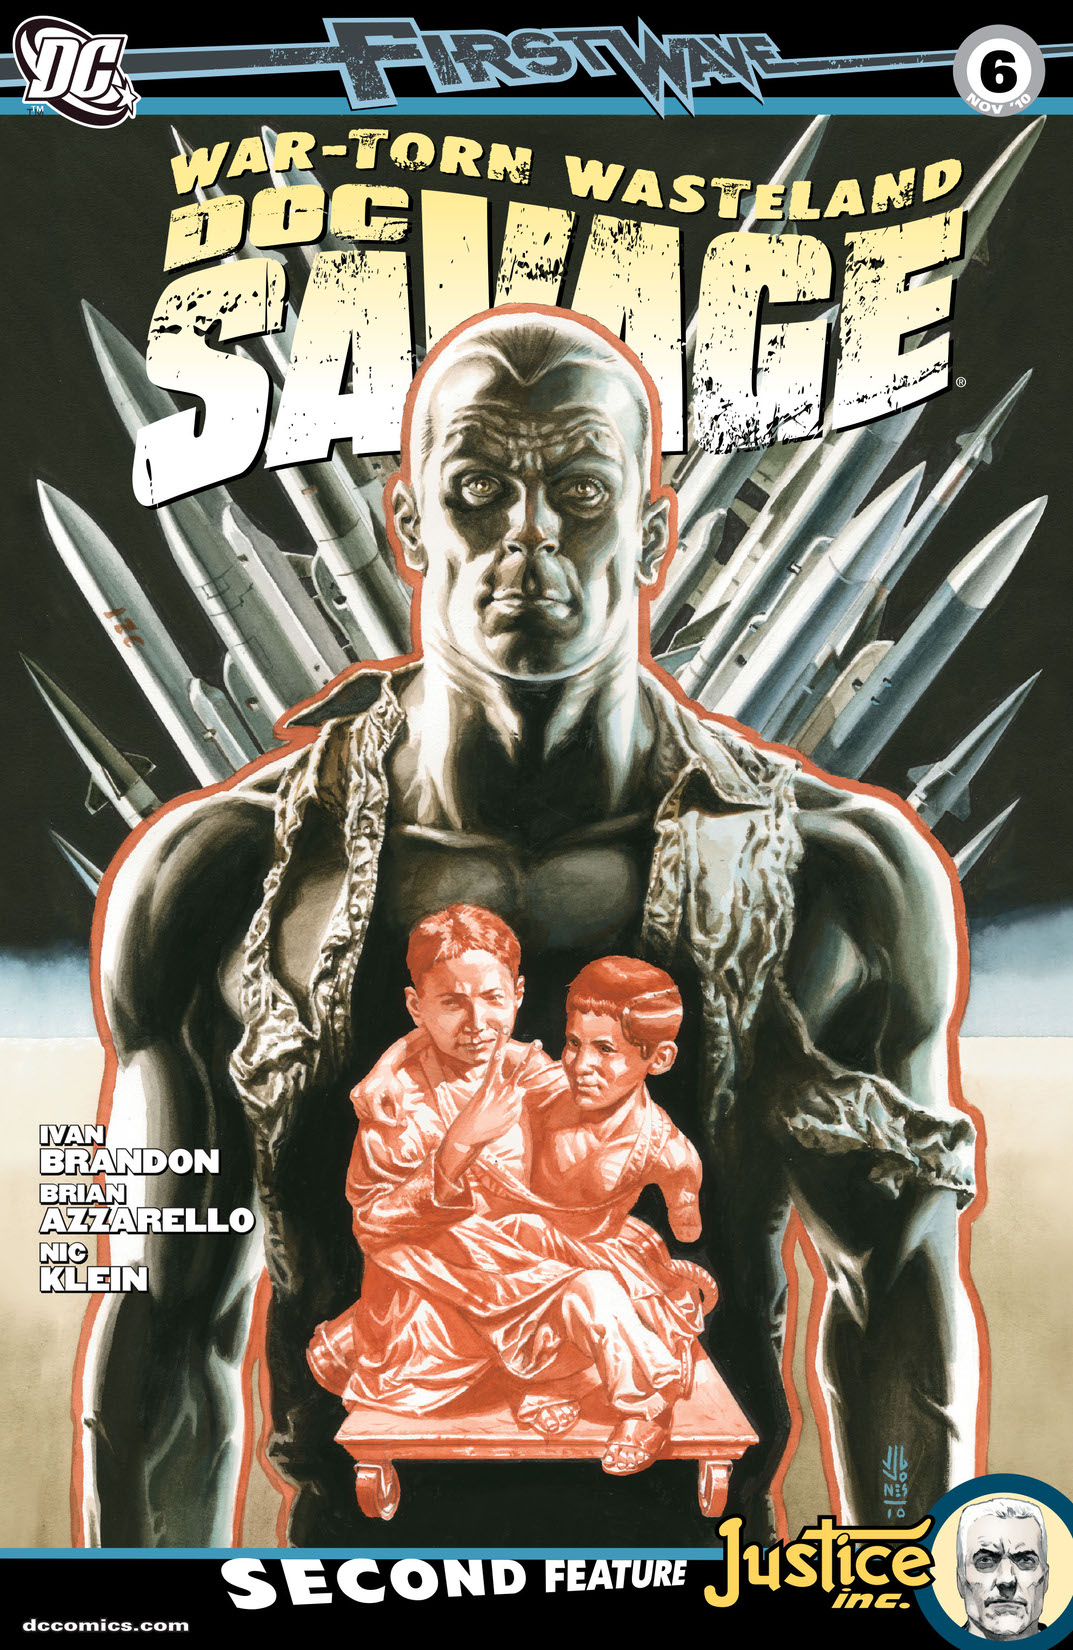 Doc Savage #6 preview images